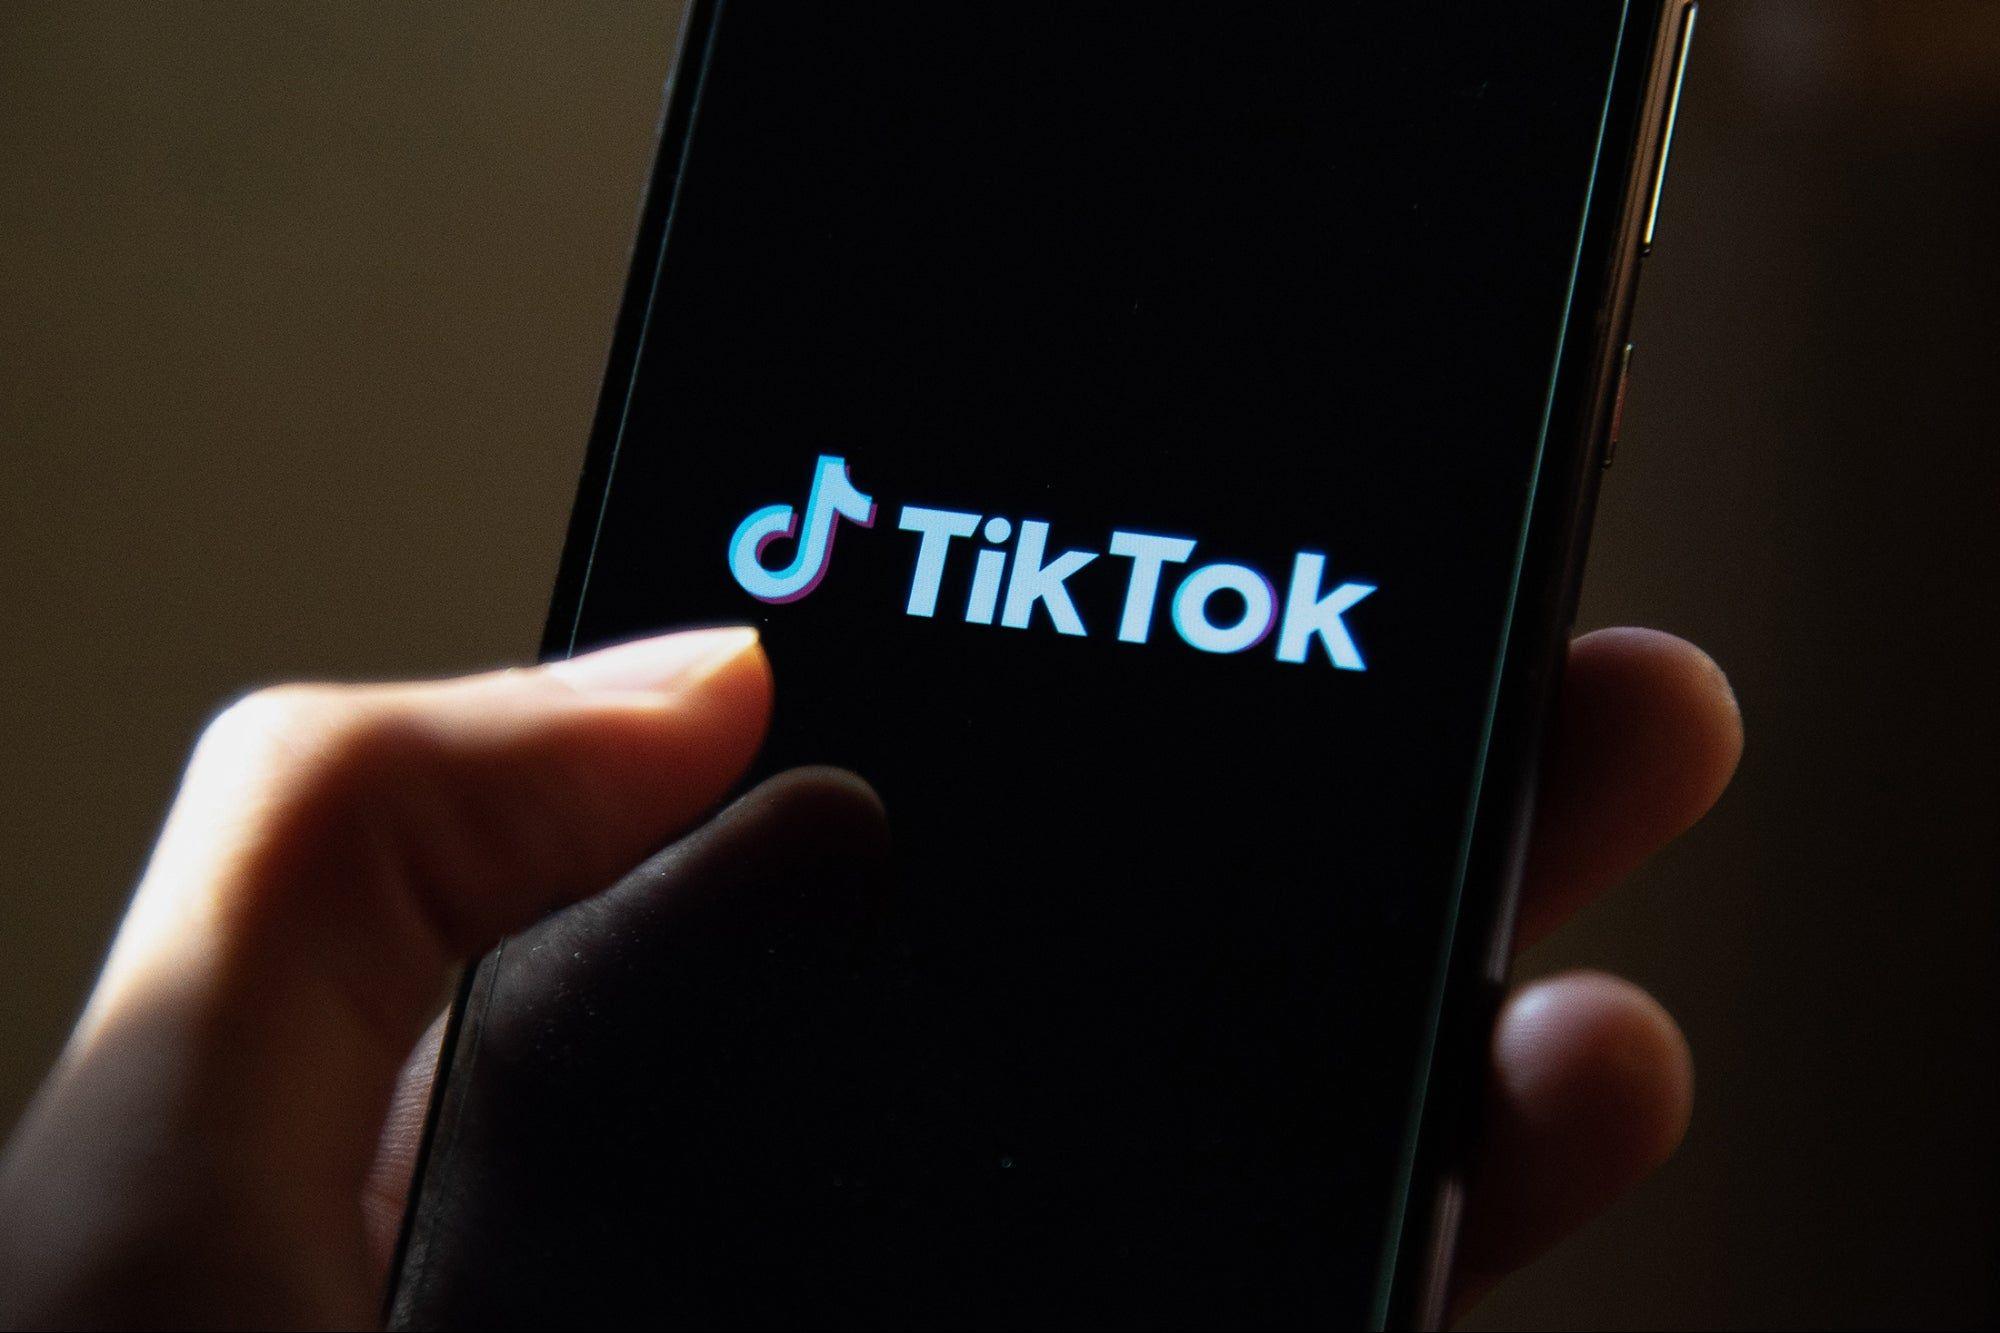 Biden signed a law that could block TikTok in the US